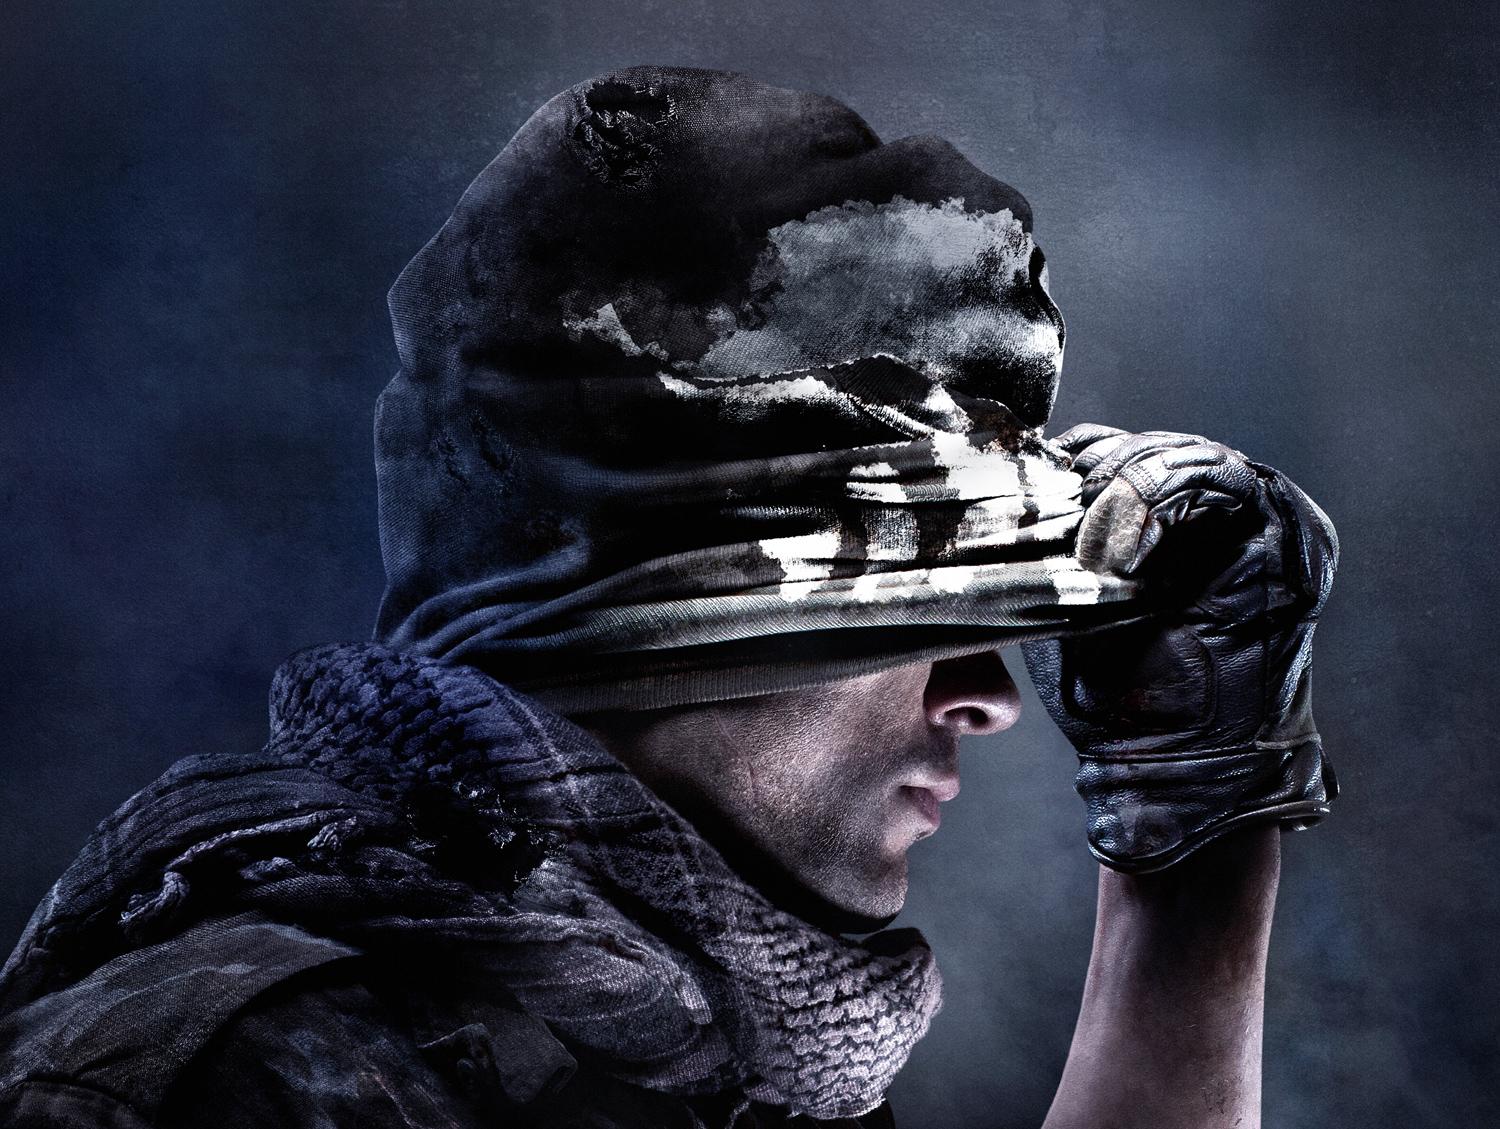 Call of Duty Ghost’s live-action launch trailer imagines an epic day